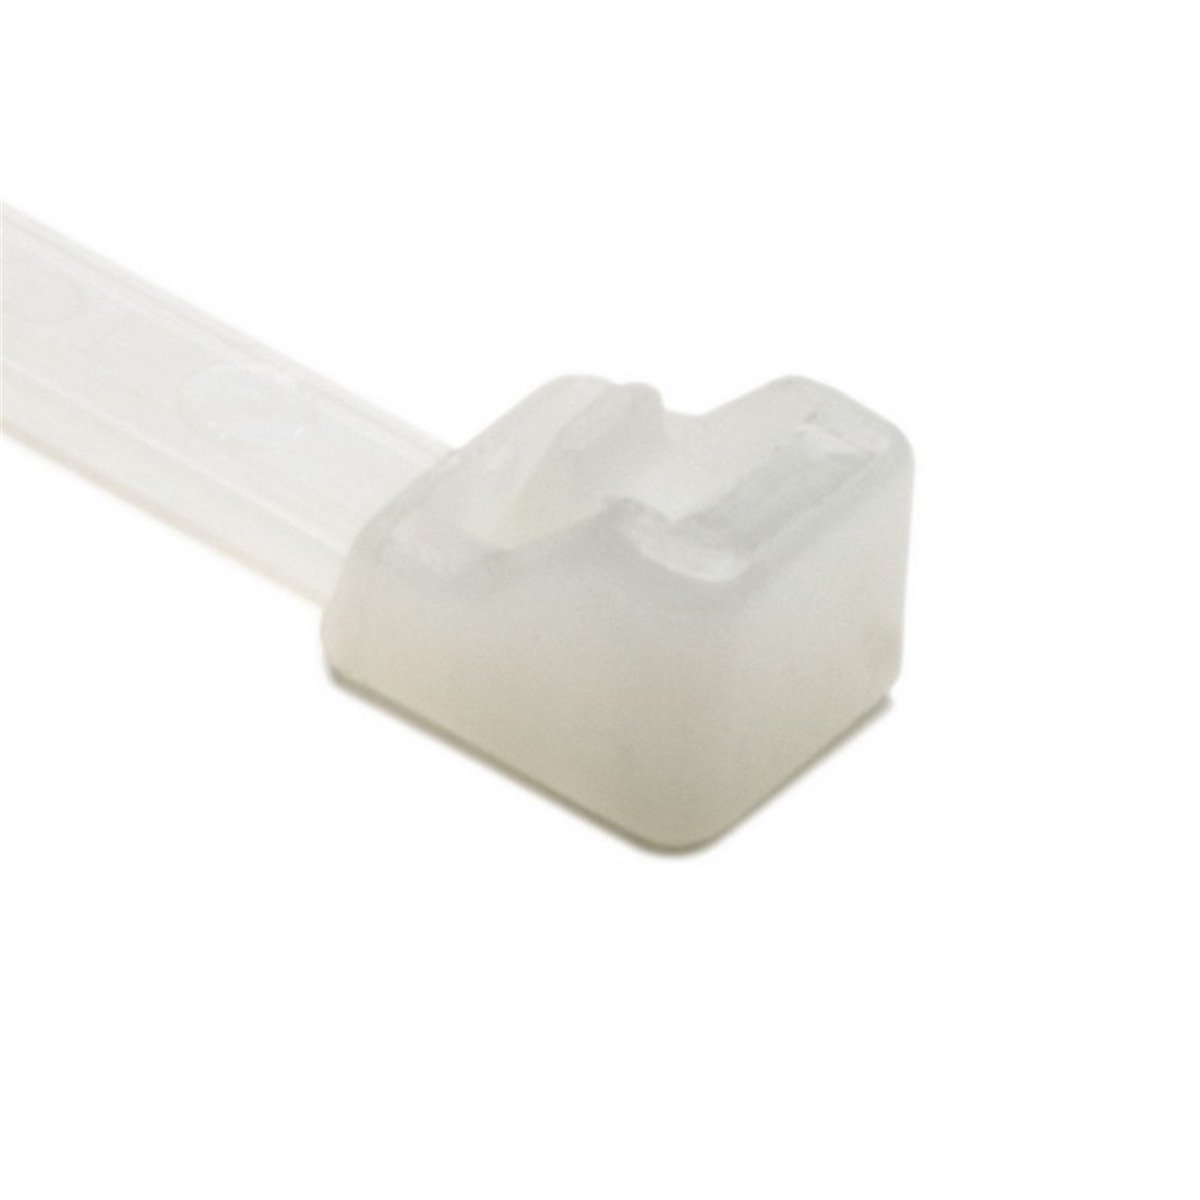 Releasable cable tie RT40R-PA66-NA, 4x215.9mm, natural, 100 pcs. HellermannTyton